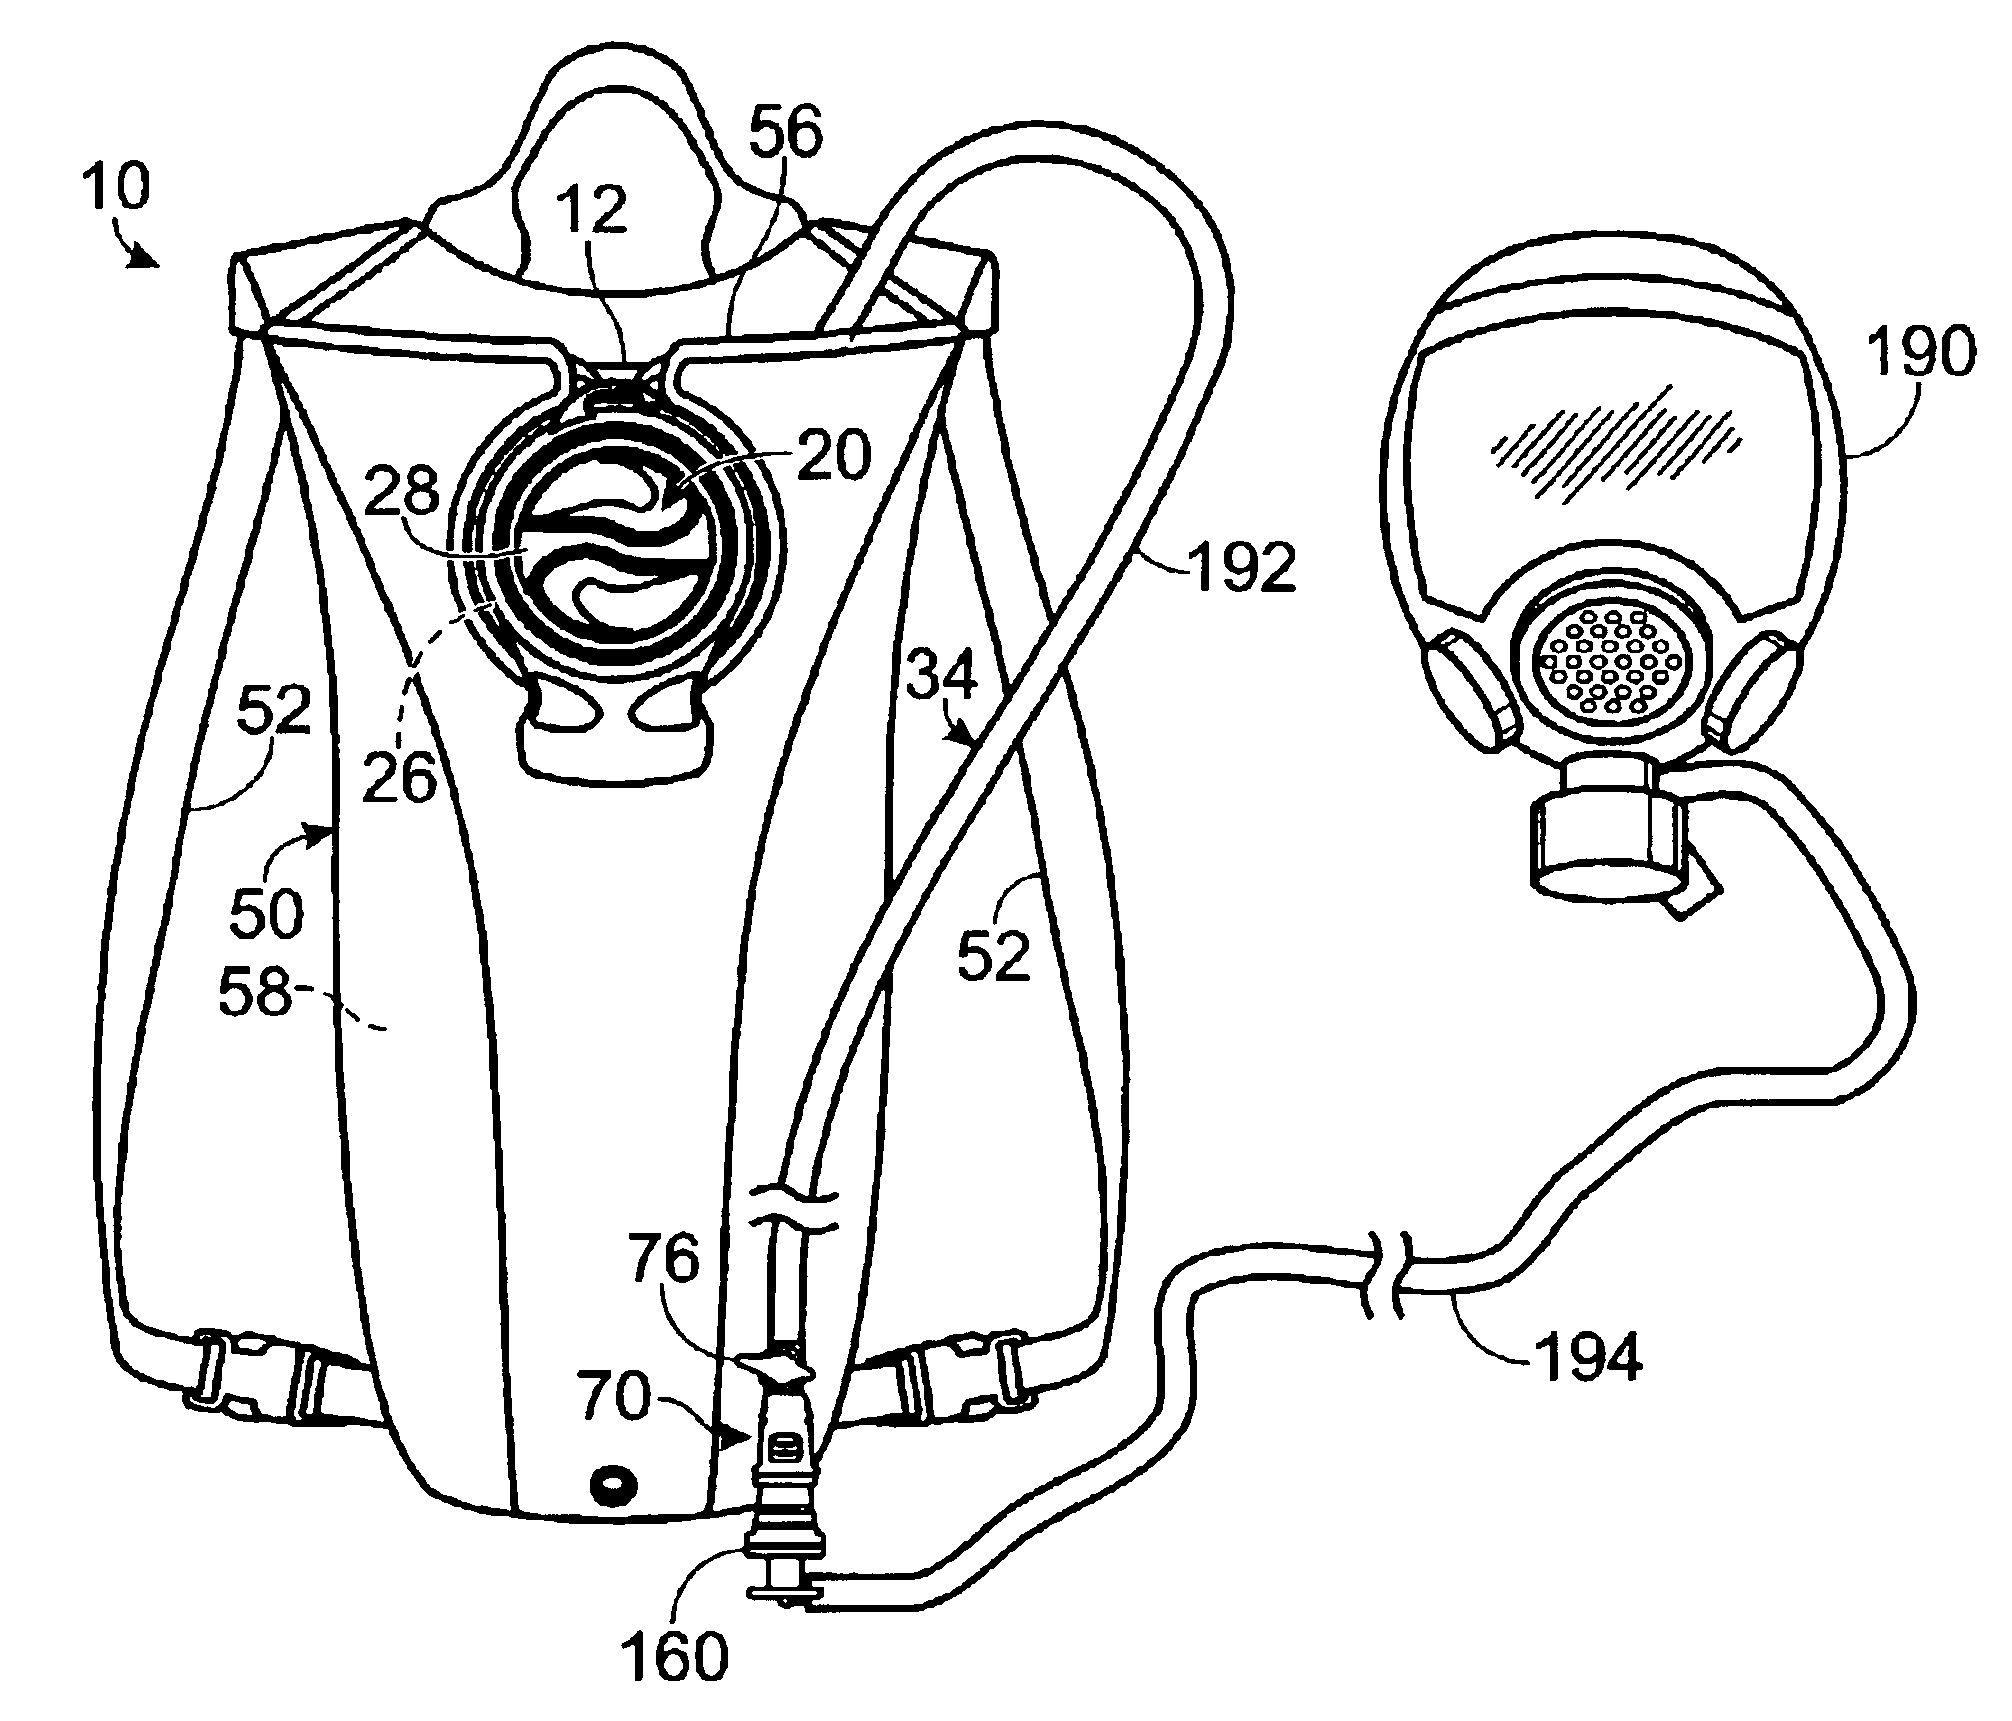 Personal hydration system with component connectivity